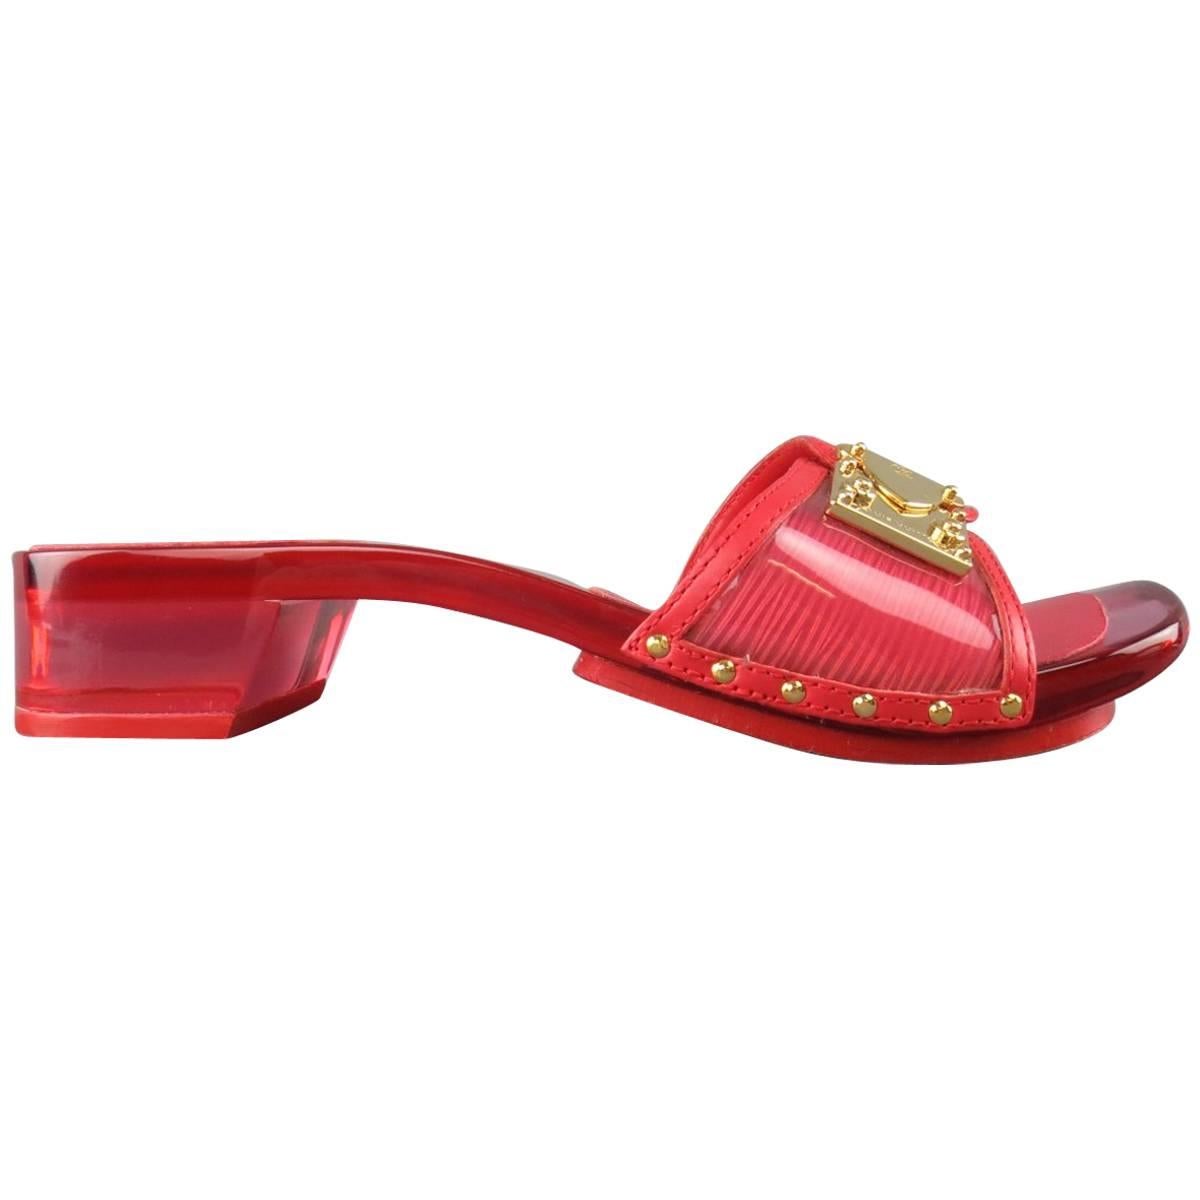 LOUIS VUITTON Size 7.5 Red Patent Epi Leather Clear Heeled Gold Buckle Sandals